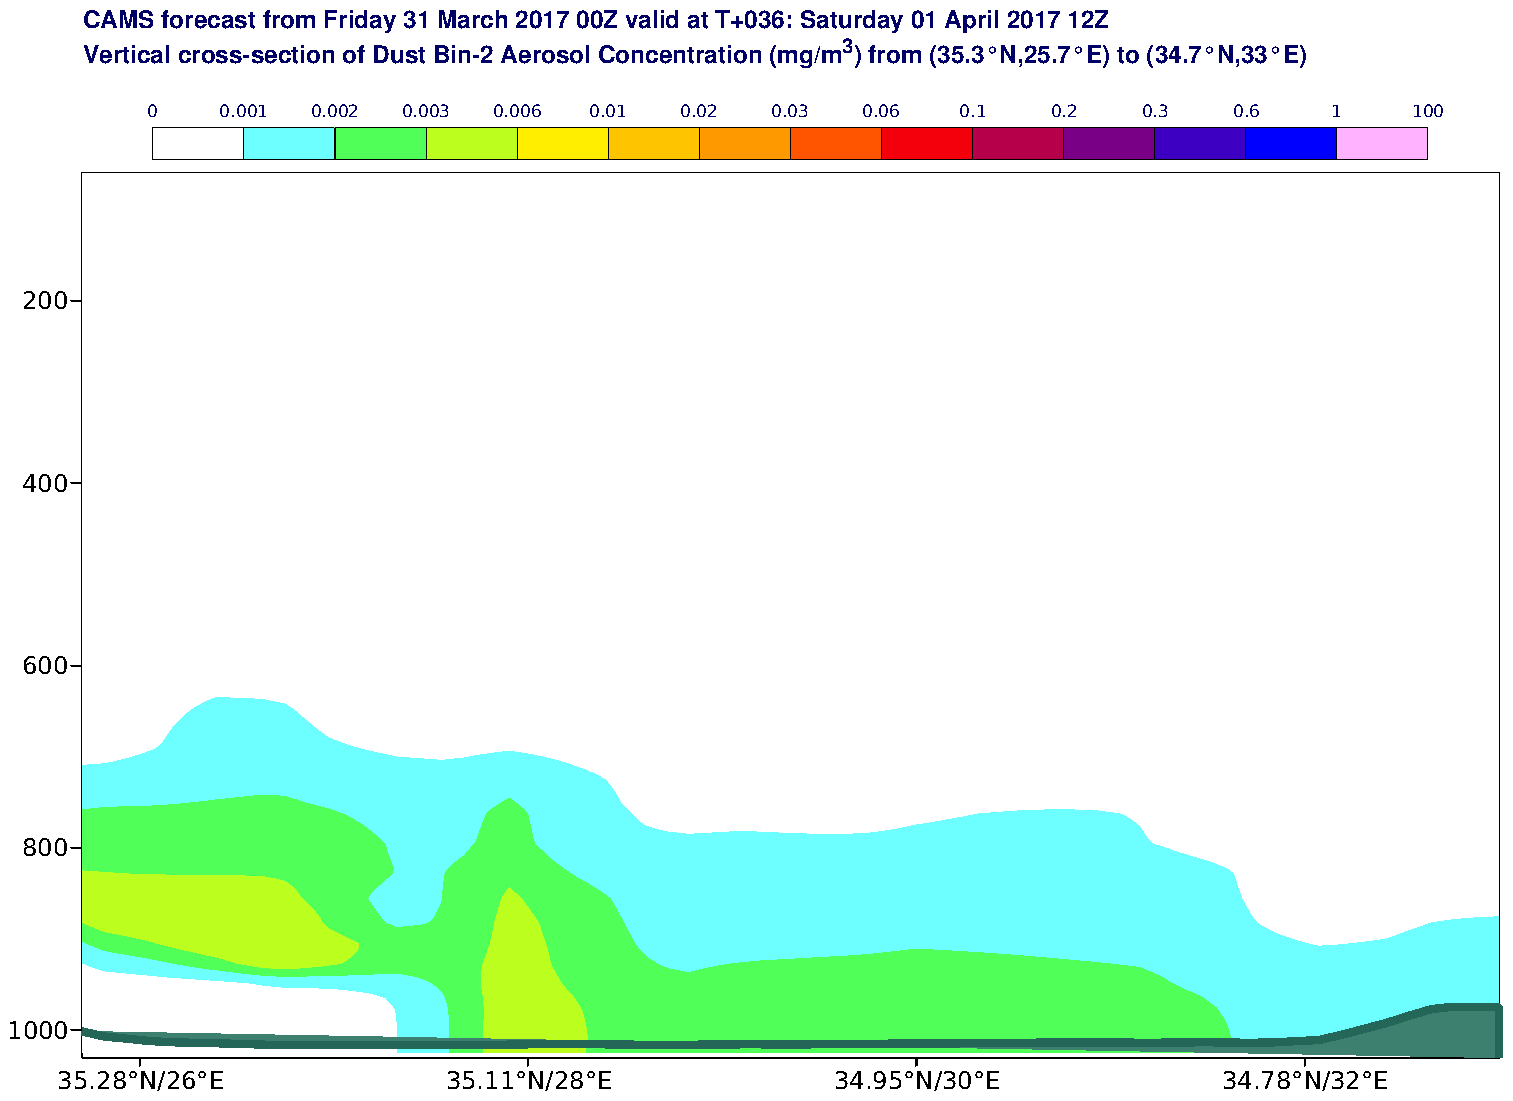 Vertical cross-section of Dust Bin-2 Aerosol Concentration (mg/m3) valid at T36 - 2017-04-01 12:00